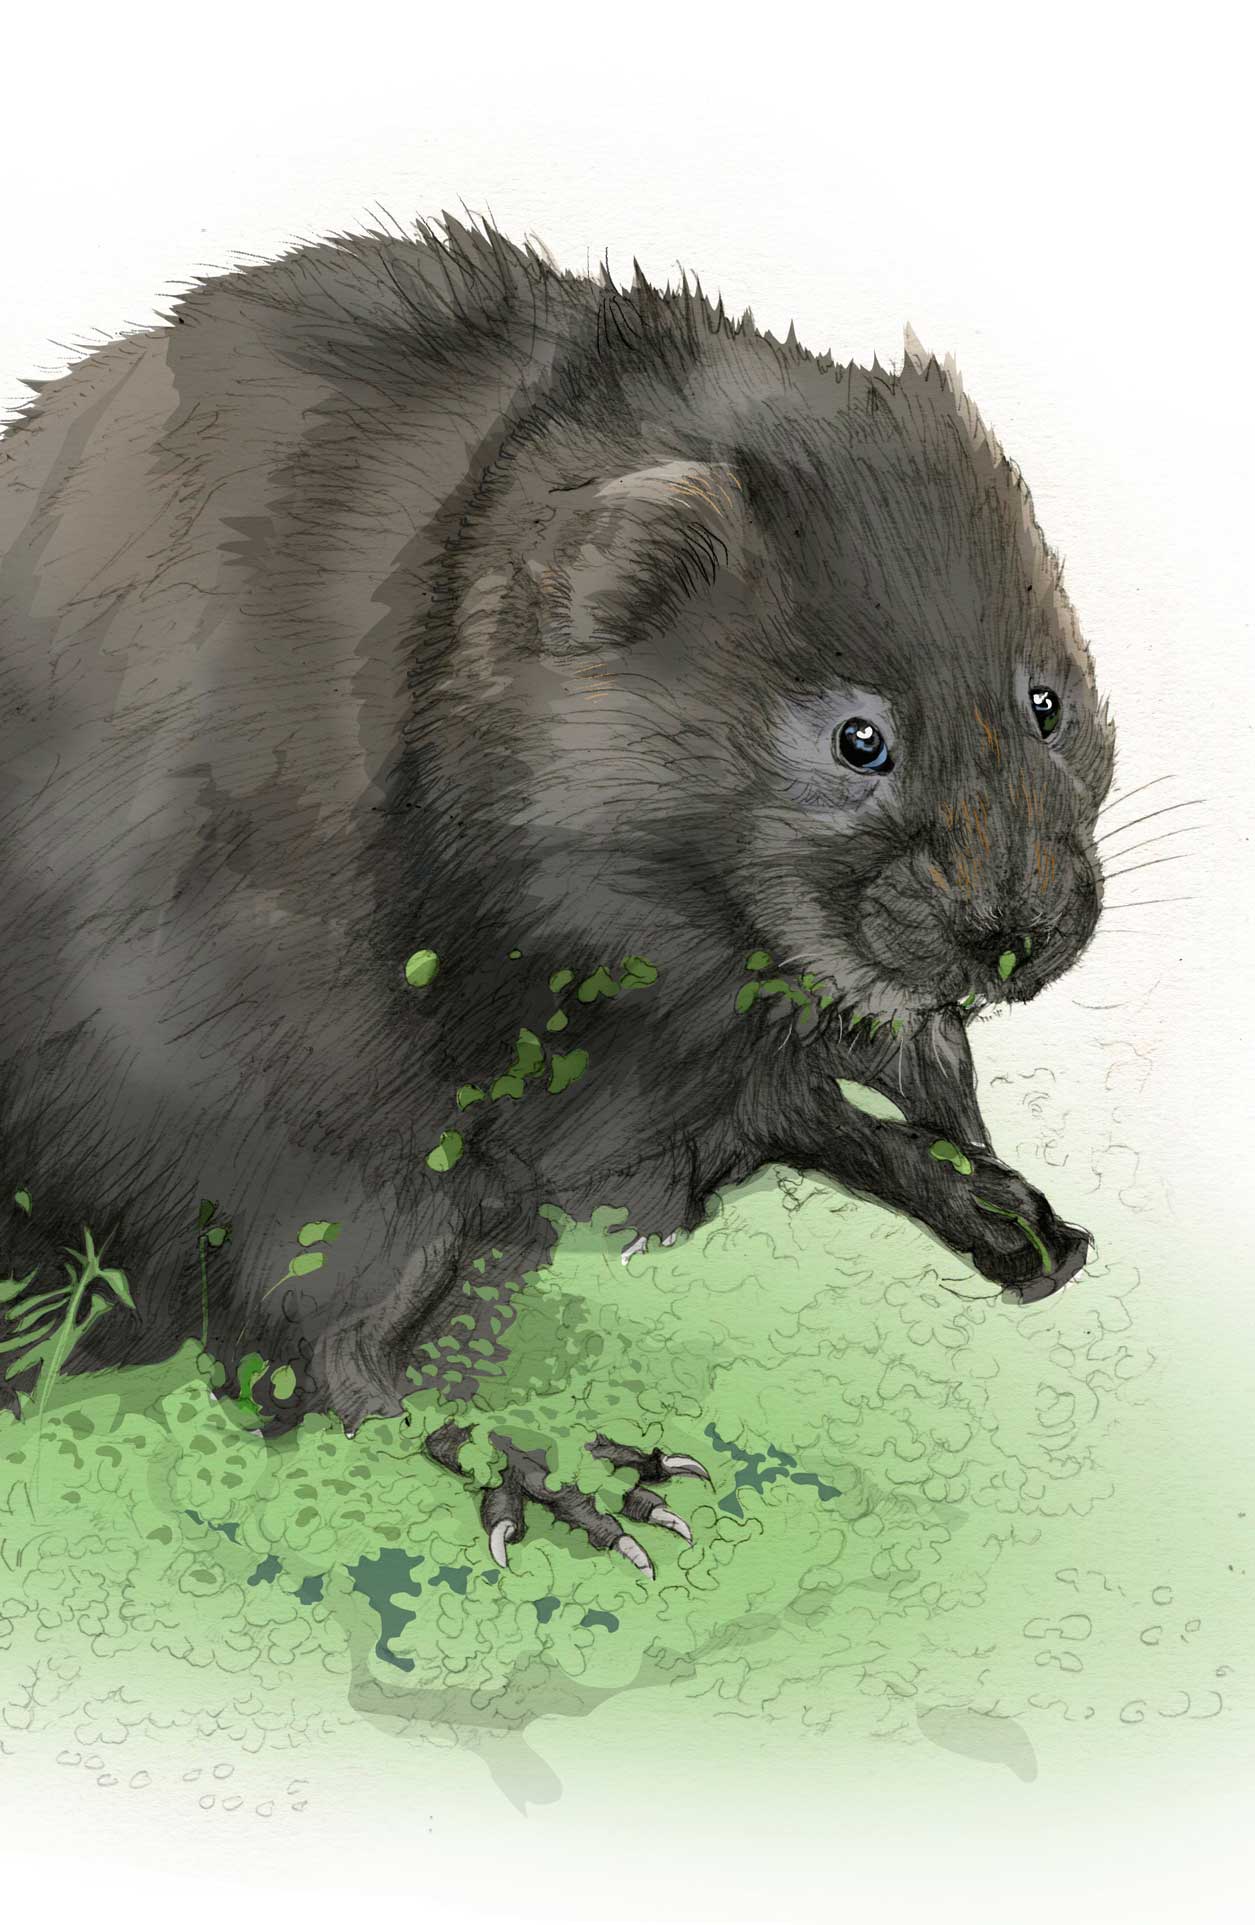 Water vole illustration by Nick Ellwood.